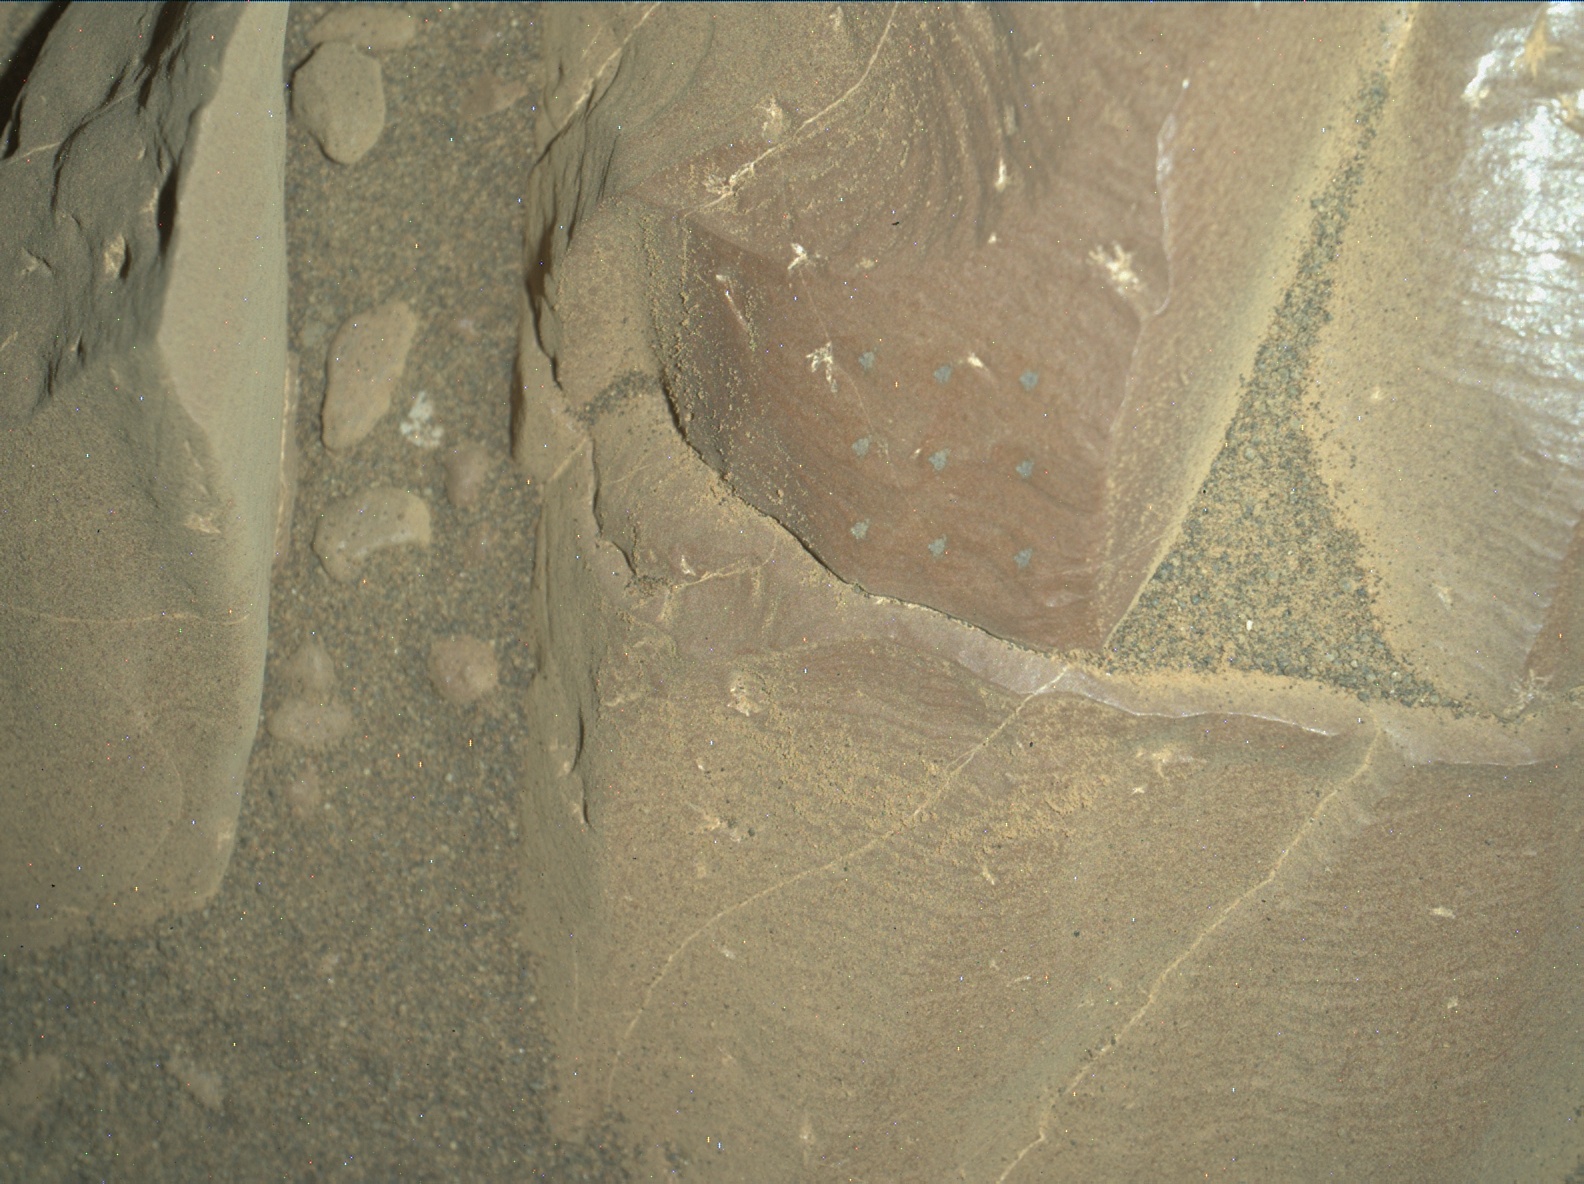 Nasa's Mars rover Curiosity acquired this image using its Mars Hand Lens Imager (MAHLI) on Sol 1961